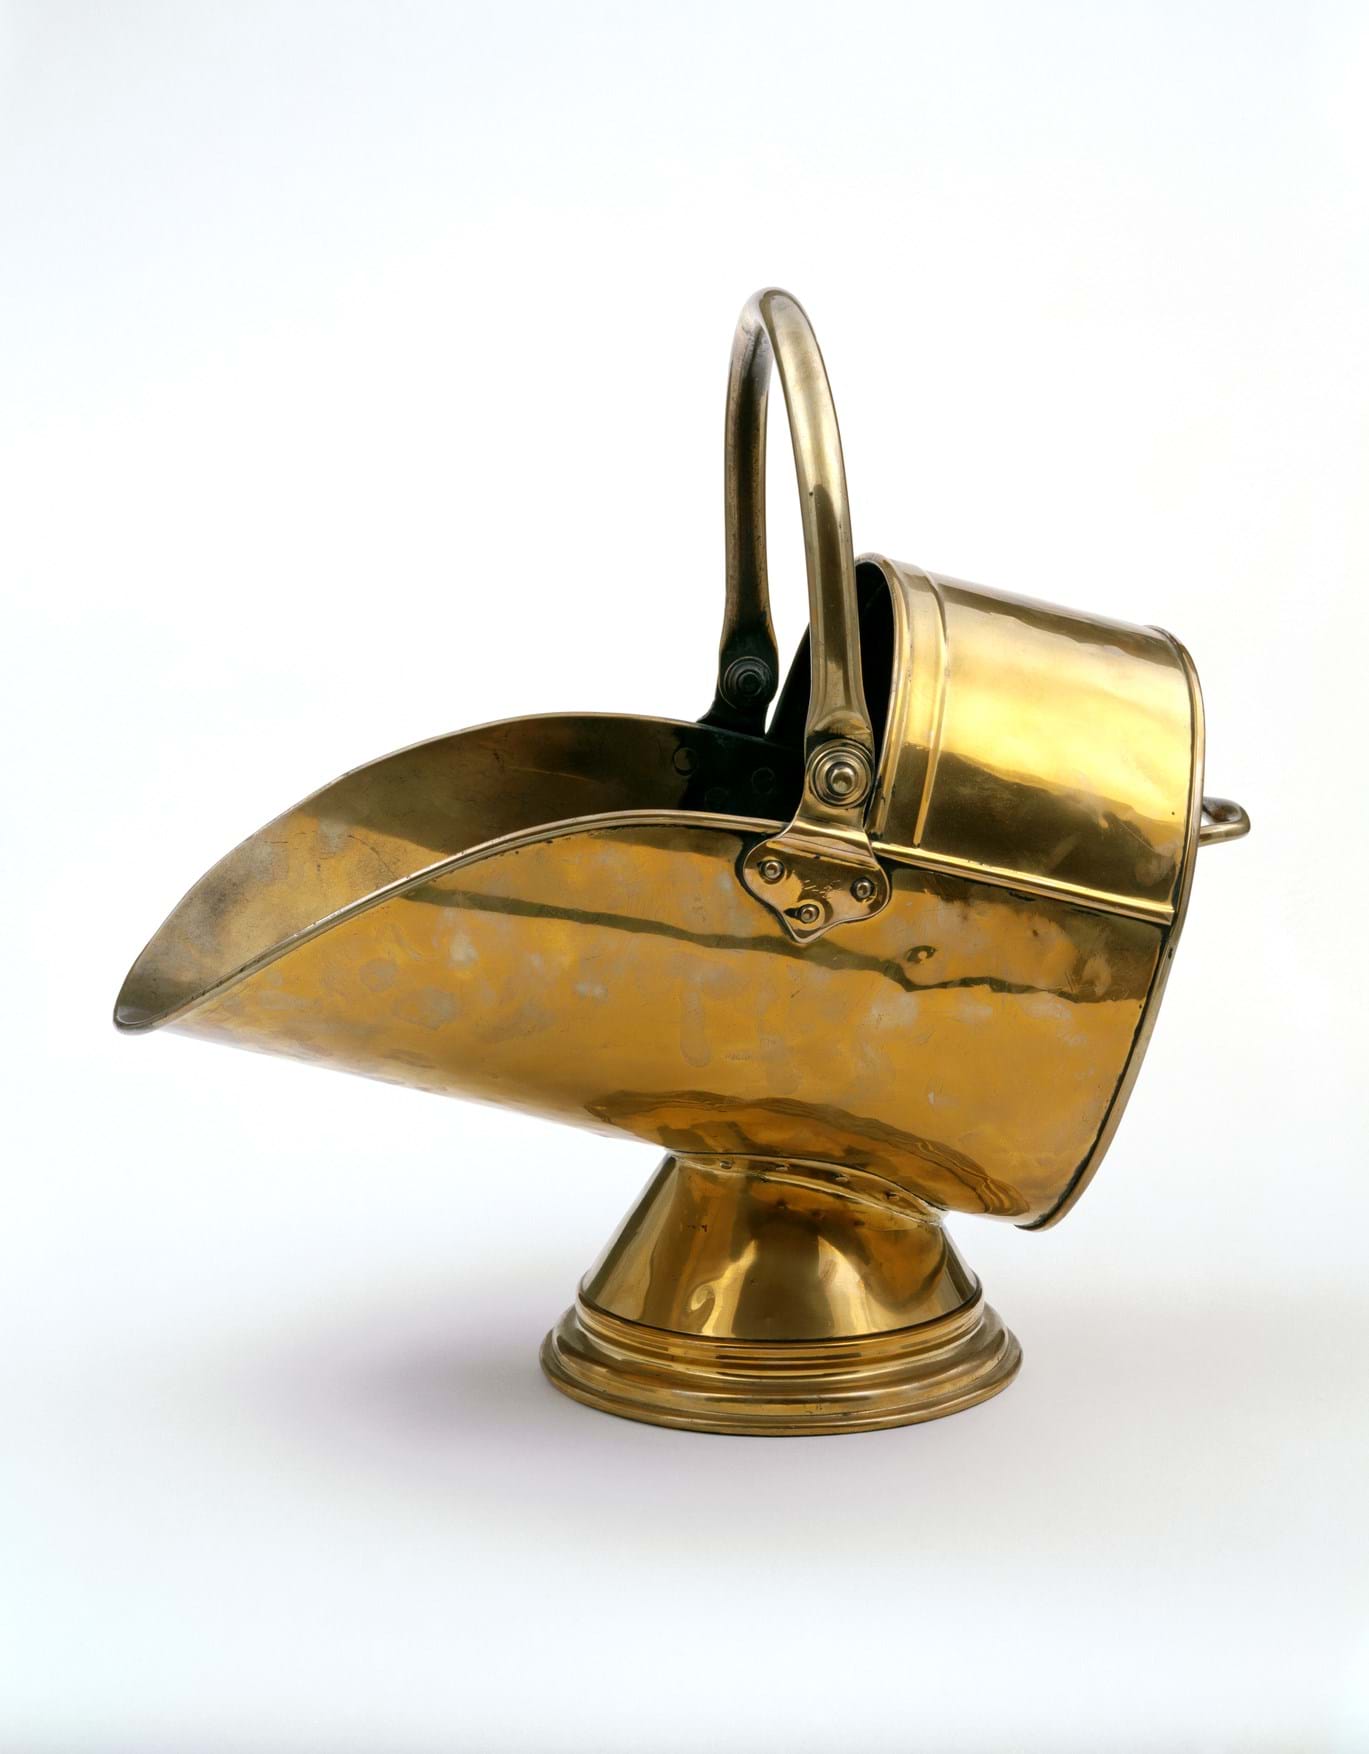 A helmet-shaped coal scuttle made from soldered and polished brass